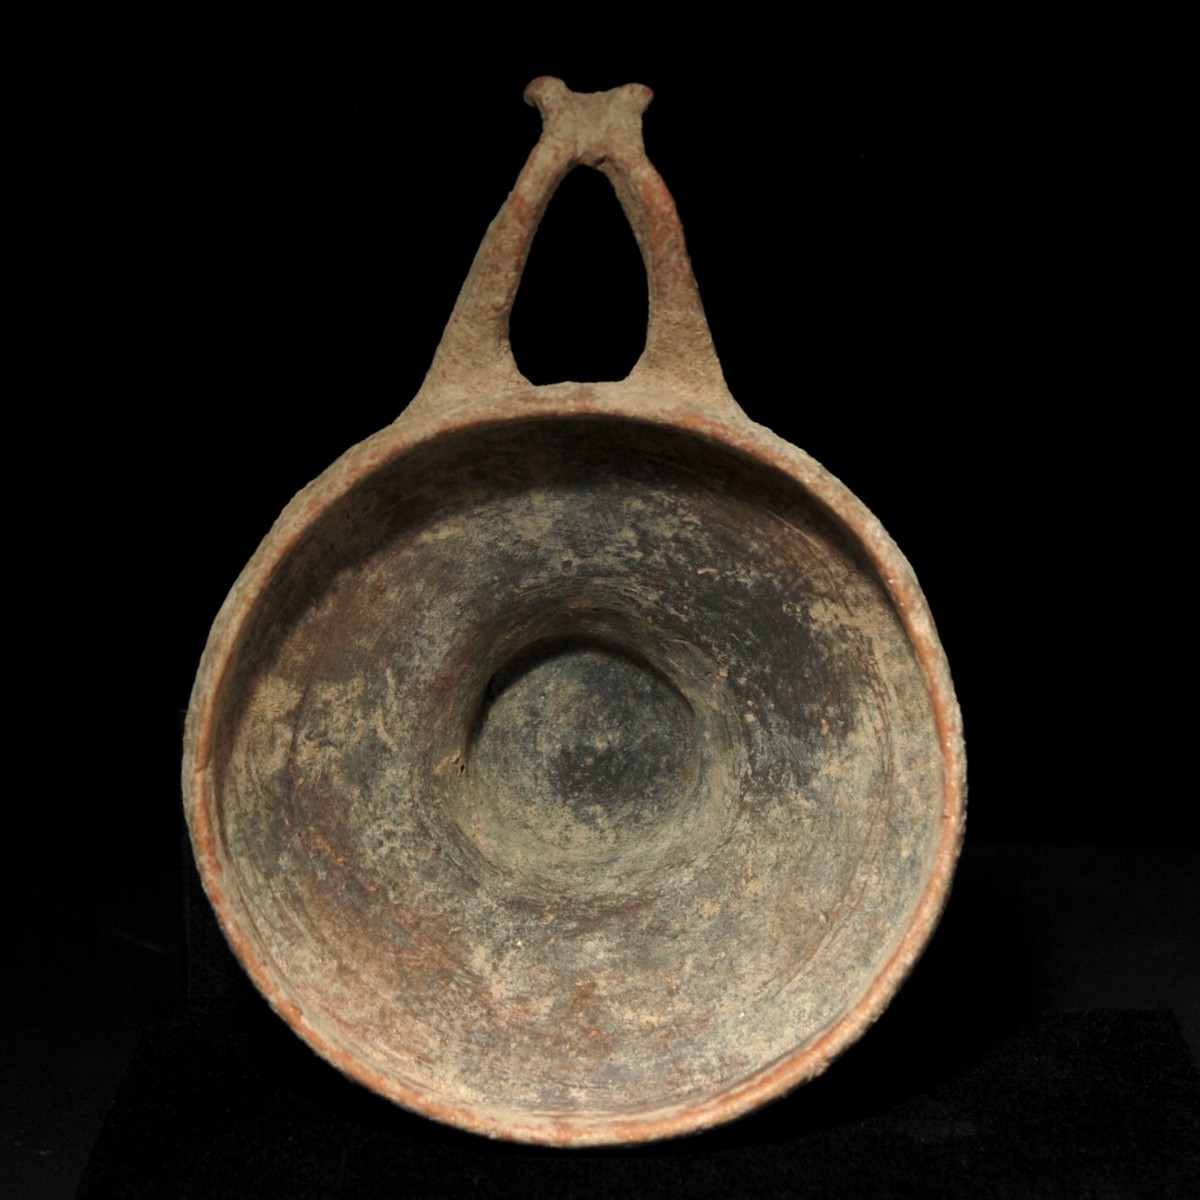 Cypriot bowl of the base ring ware with wishbone handle top